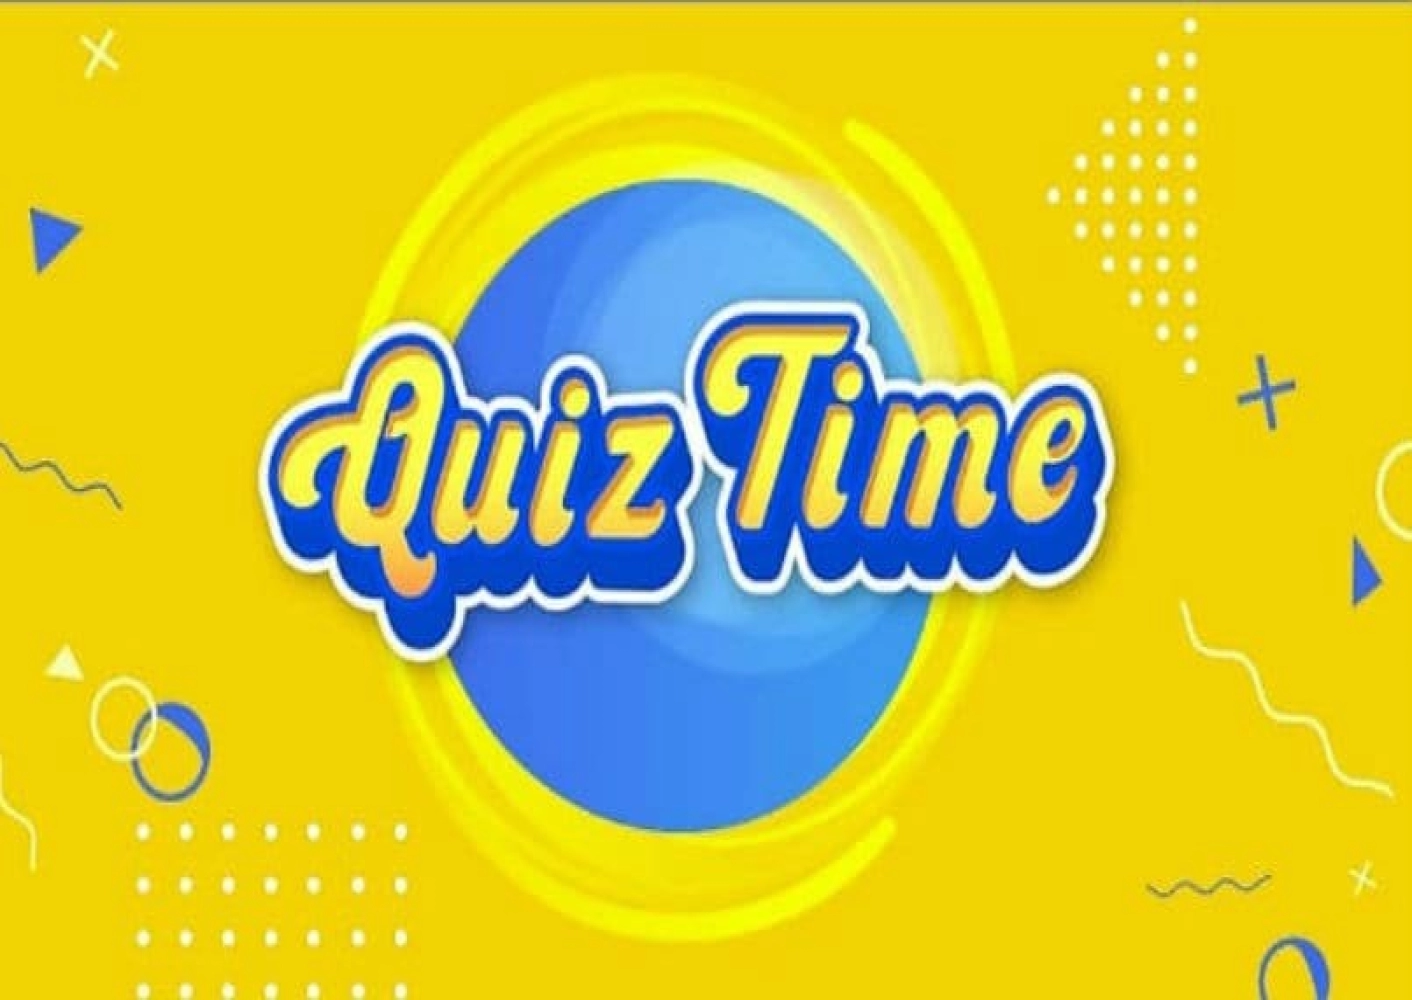 FLIPKART QUIZ: DAILY TRIVIA LIVE NOW, ANSWERS LEAKED 2, JAN, 2021